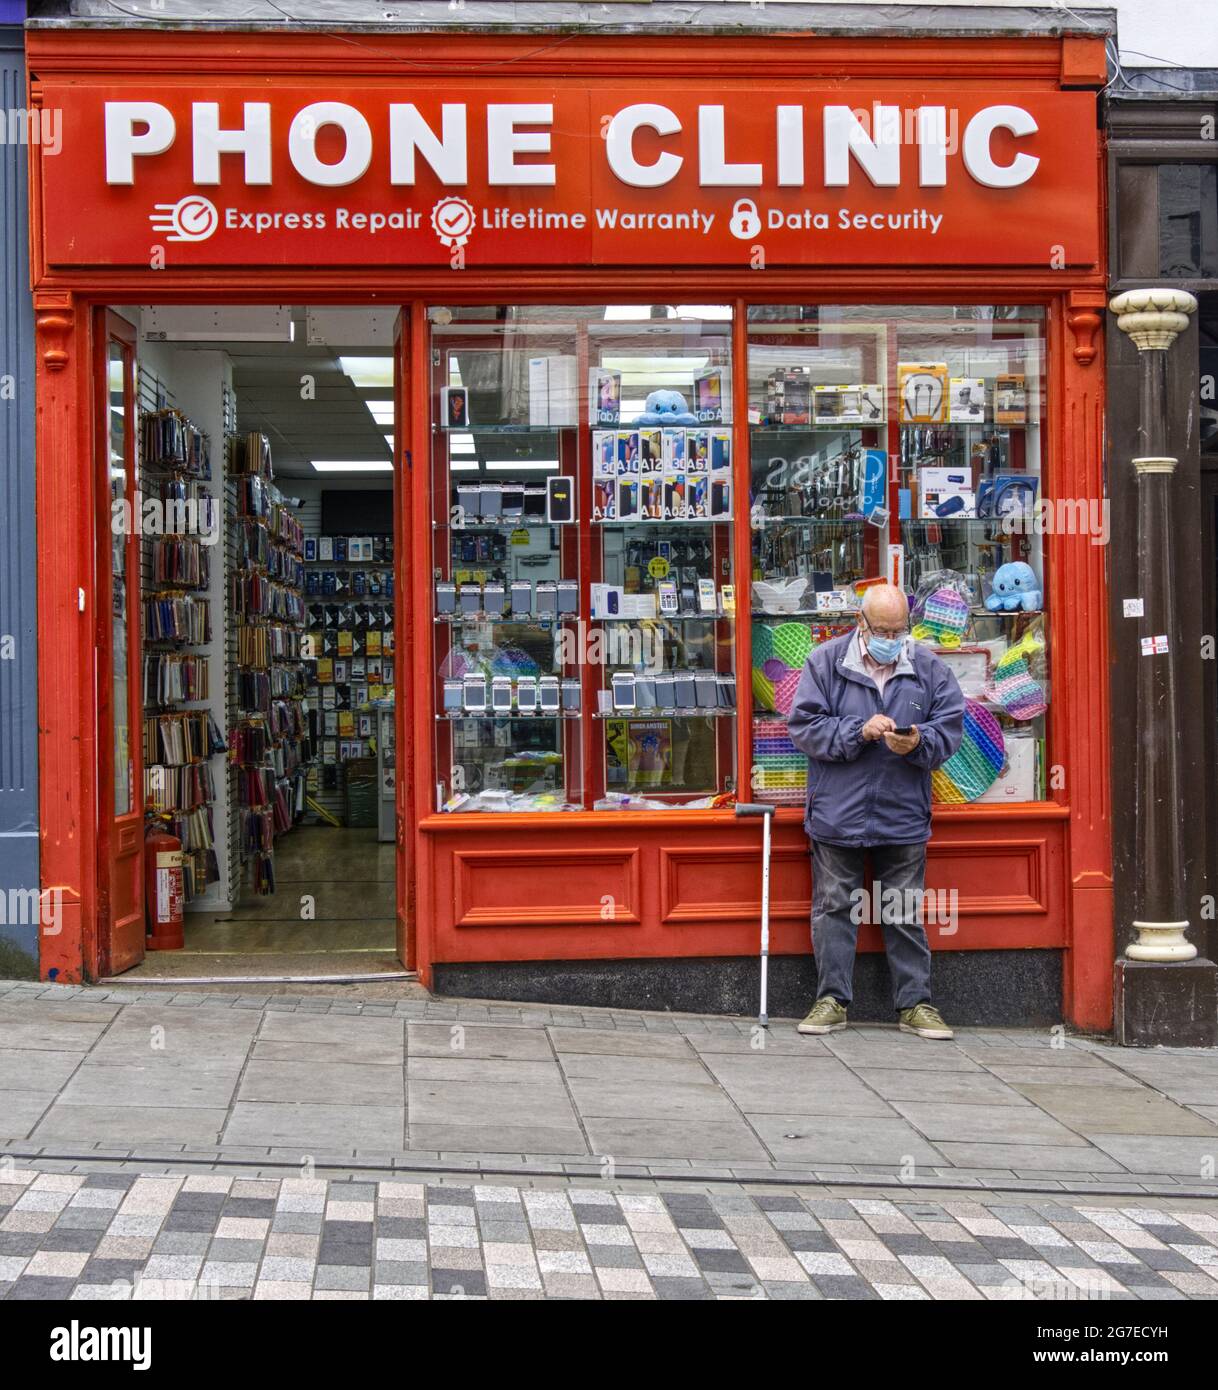 Phone Clinic shop with potential customer trying to get phone to work, Shrewsbury, Shropshire, UK Stock Photo